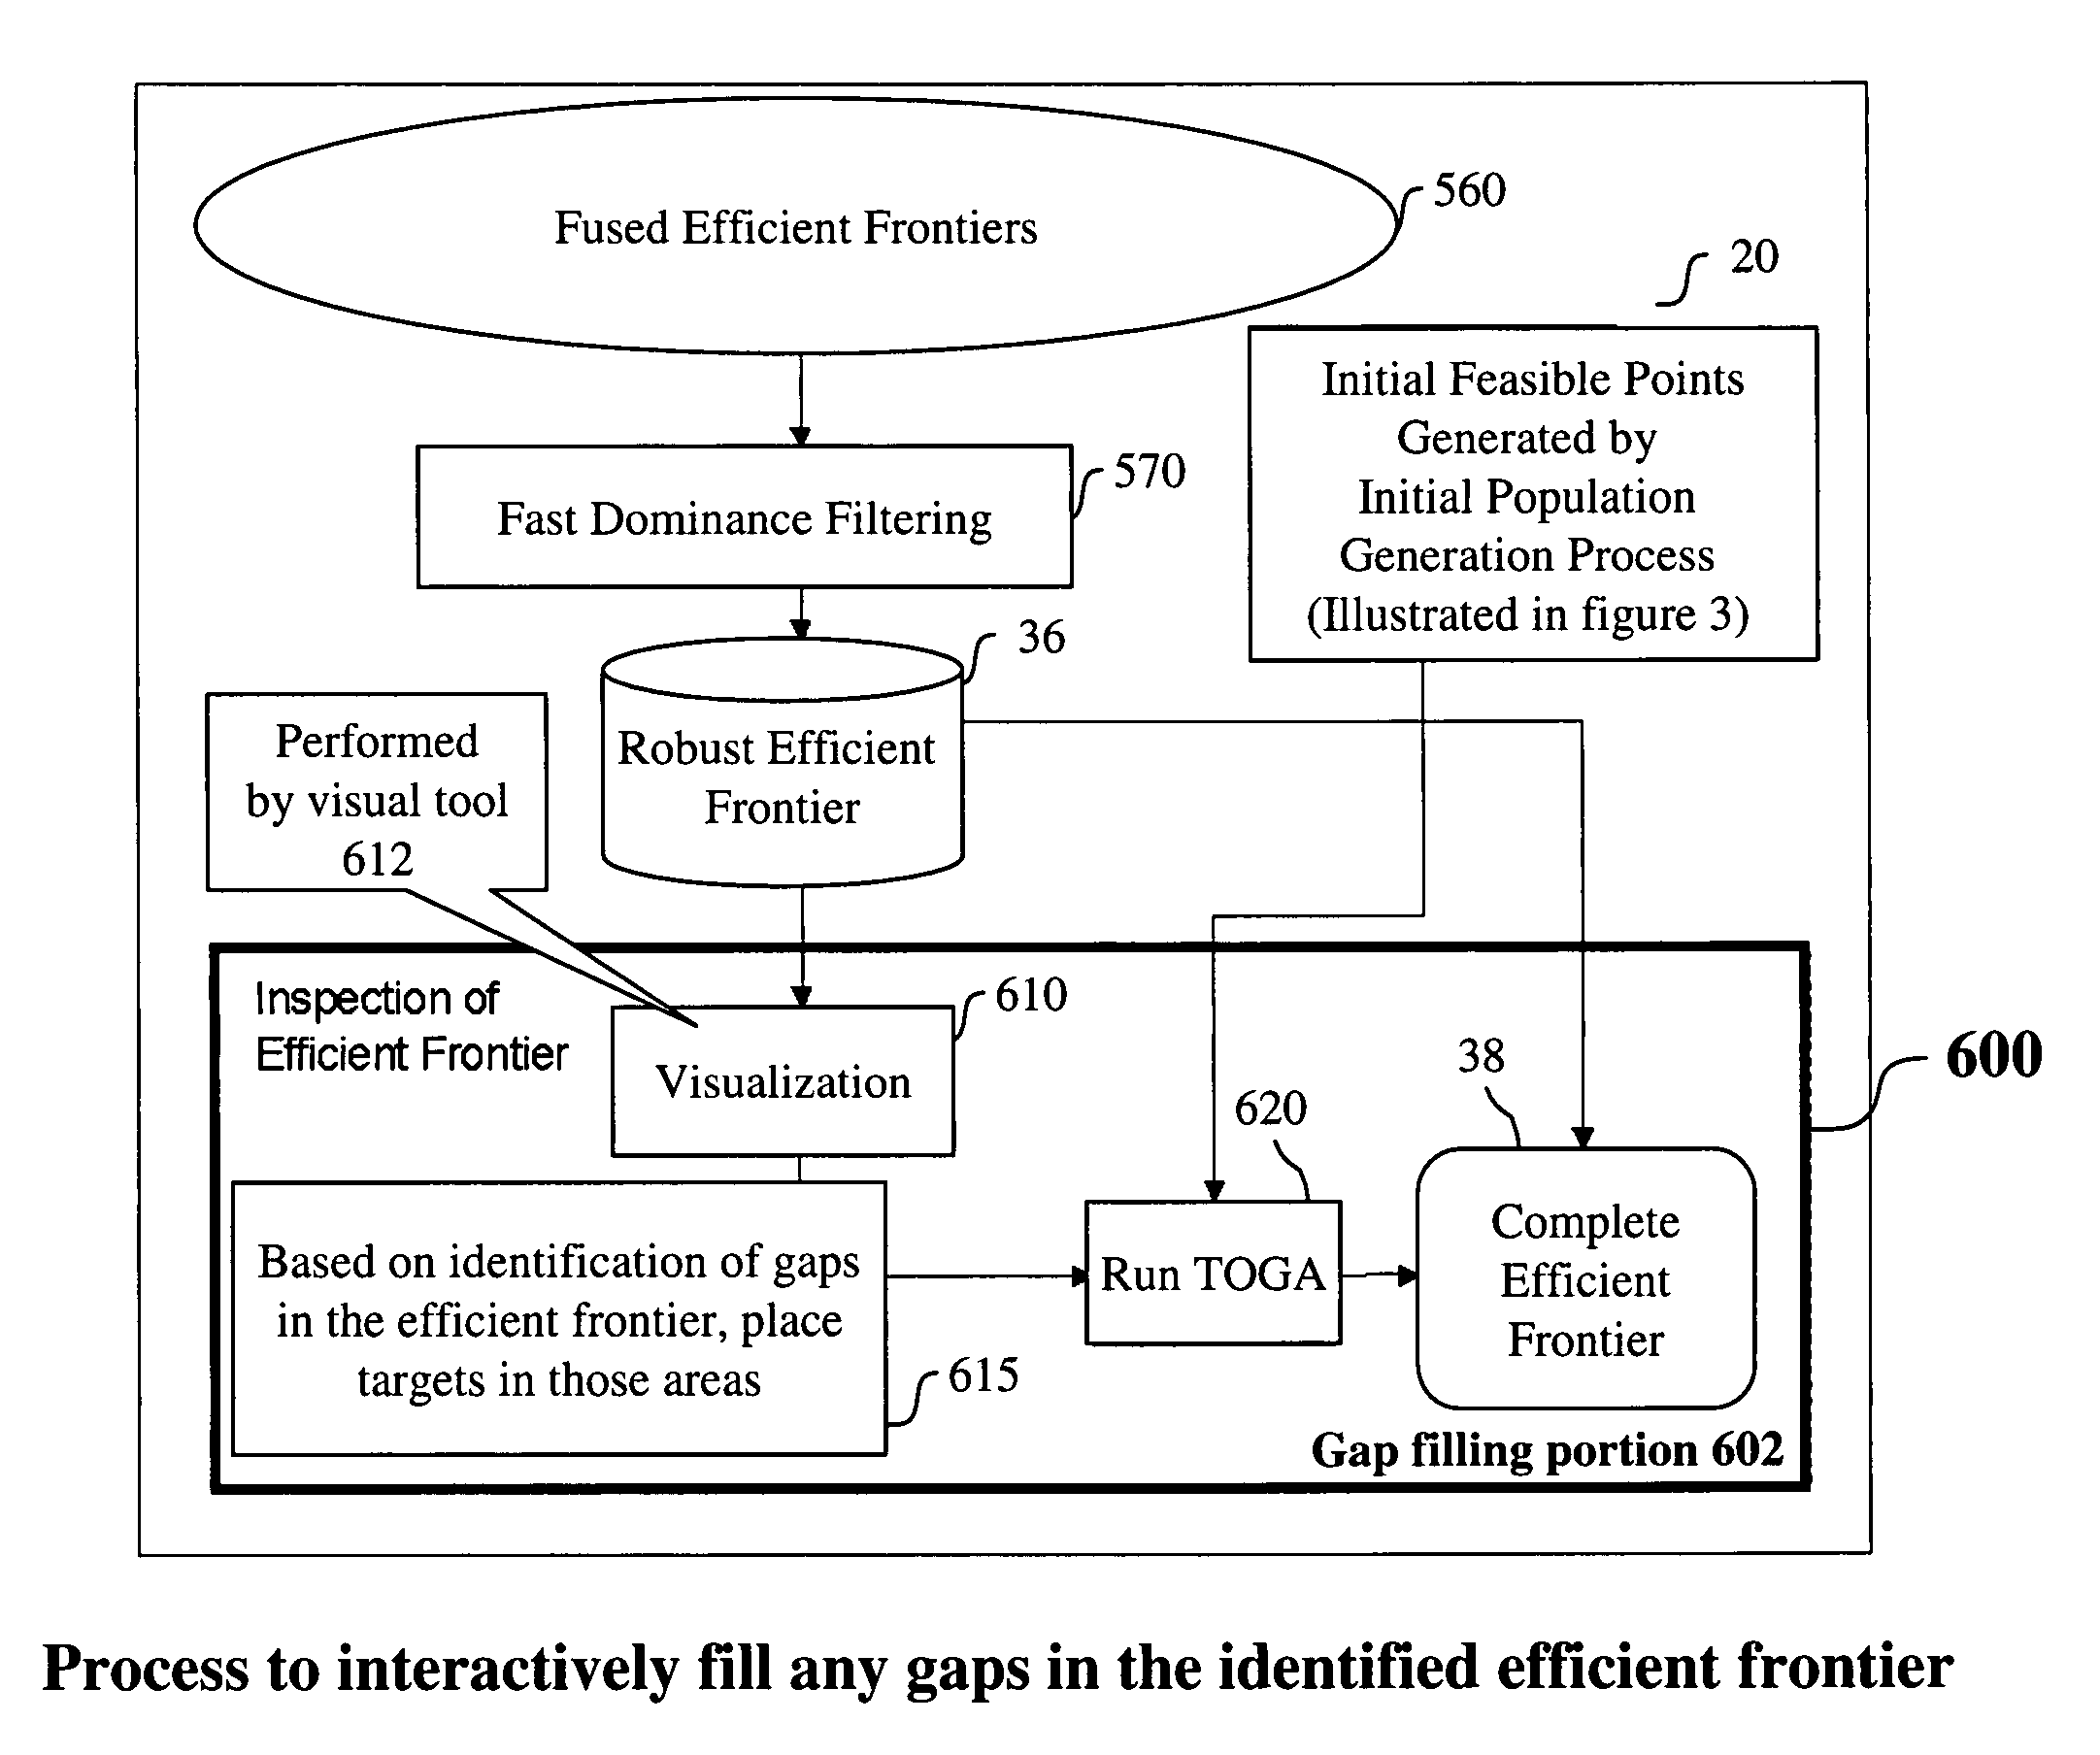 Systems and methods for efficient frontier supplementation in multi-objective portfolio analysis